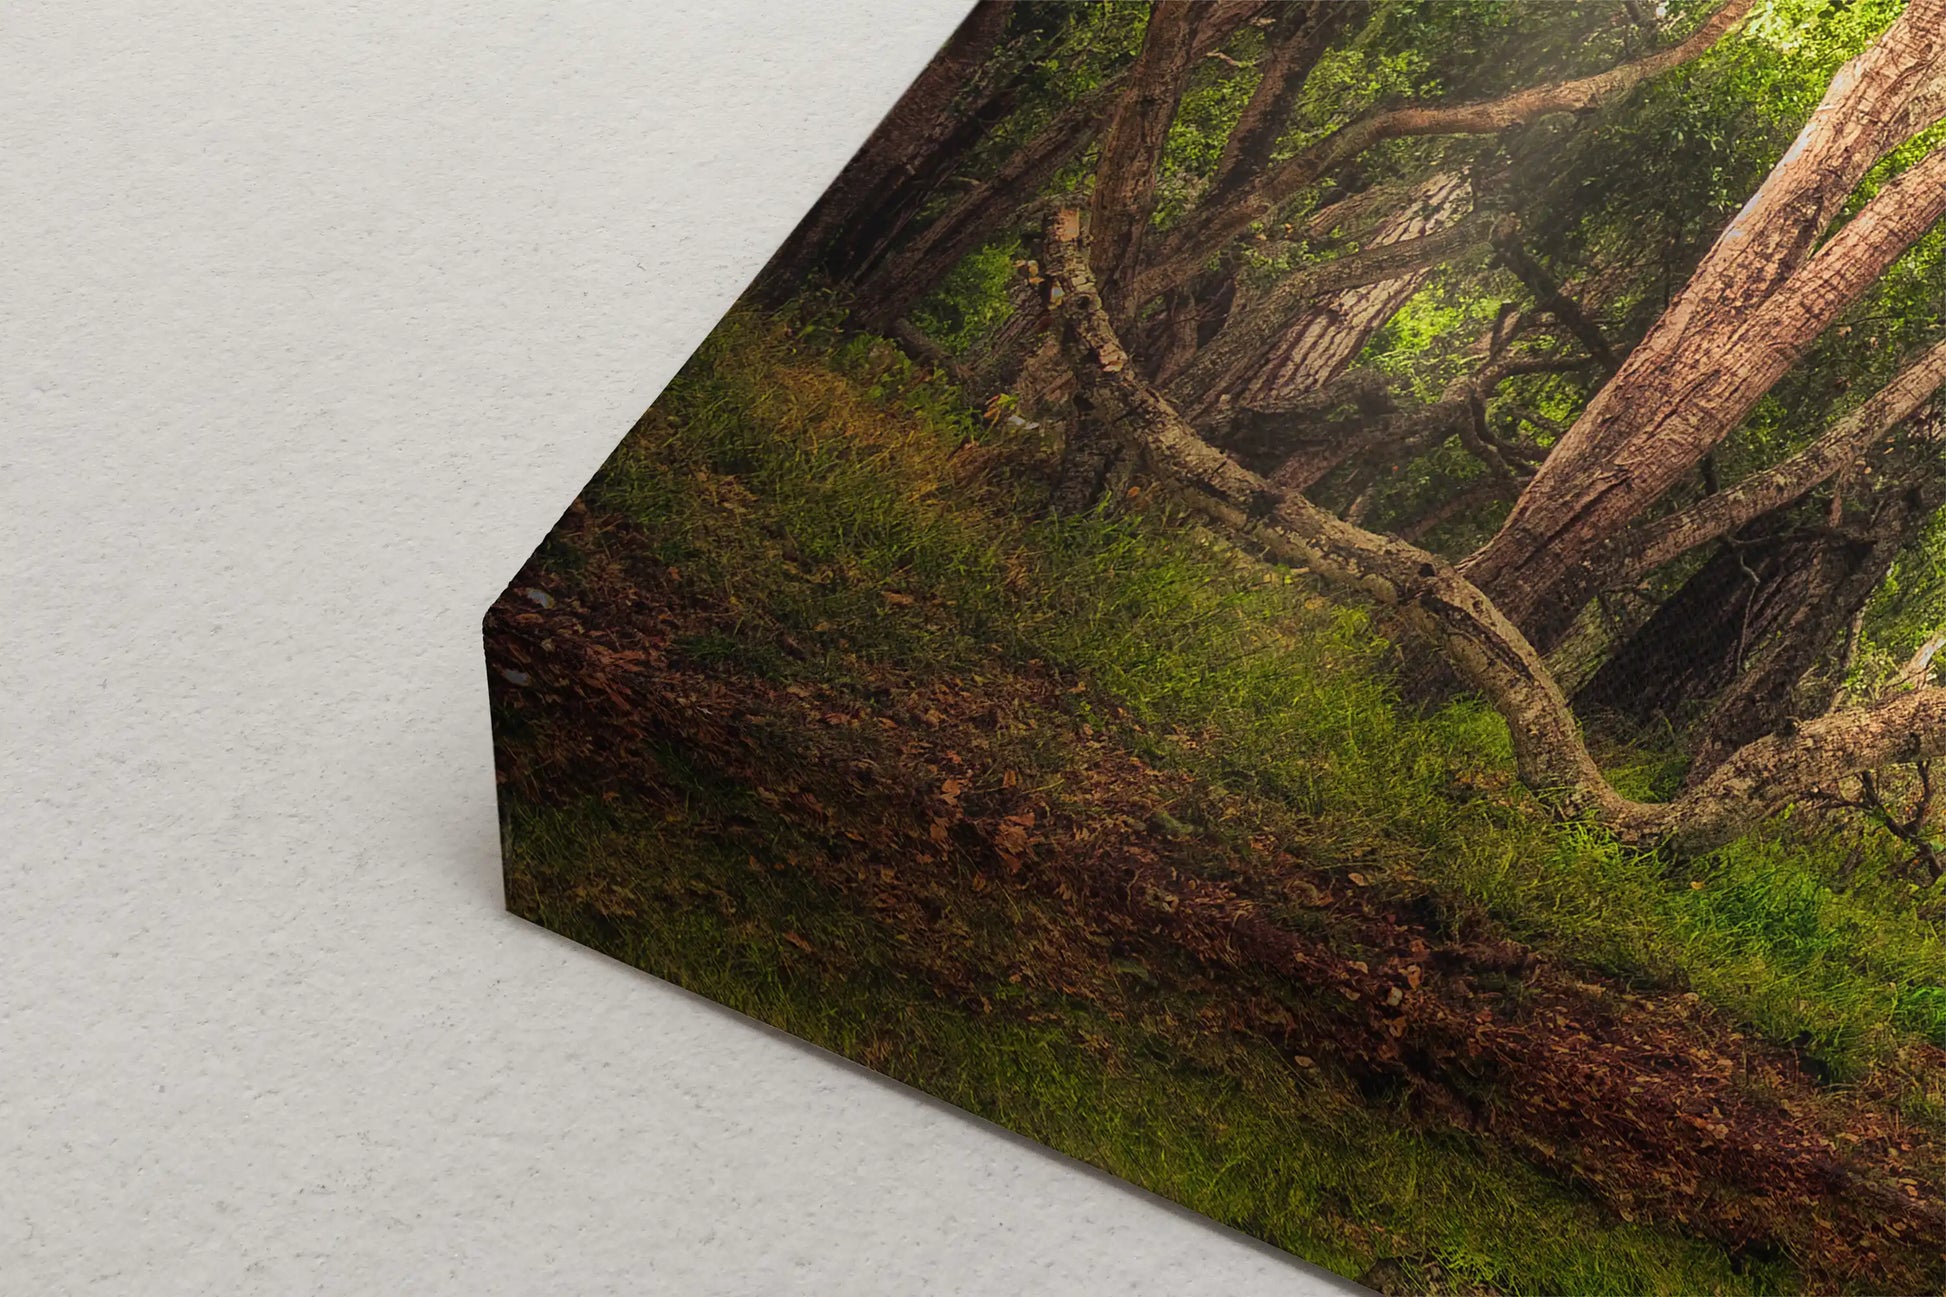 Detail of a Coast Live Oak Tree canvas print, emphasizing the rich hues of green and the tree's majestic presence.